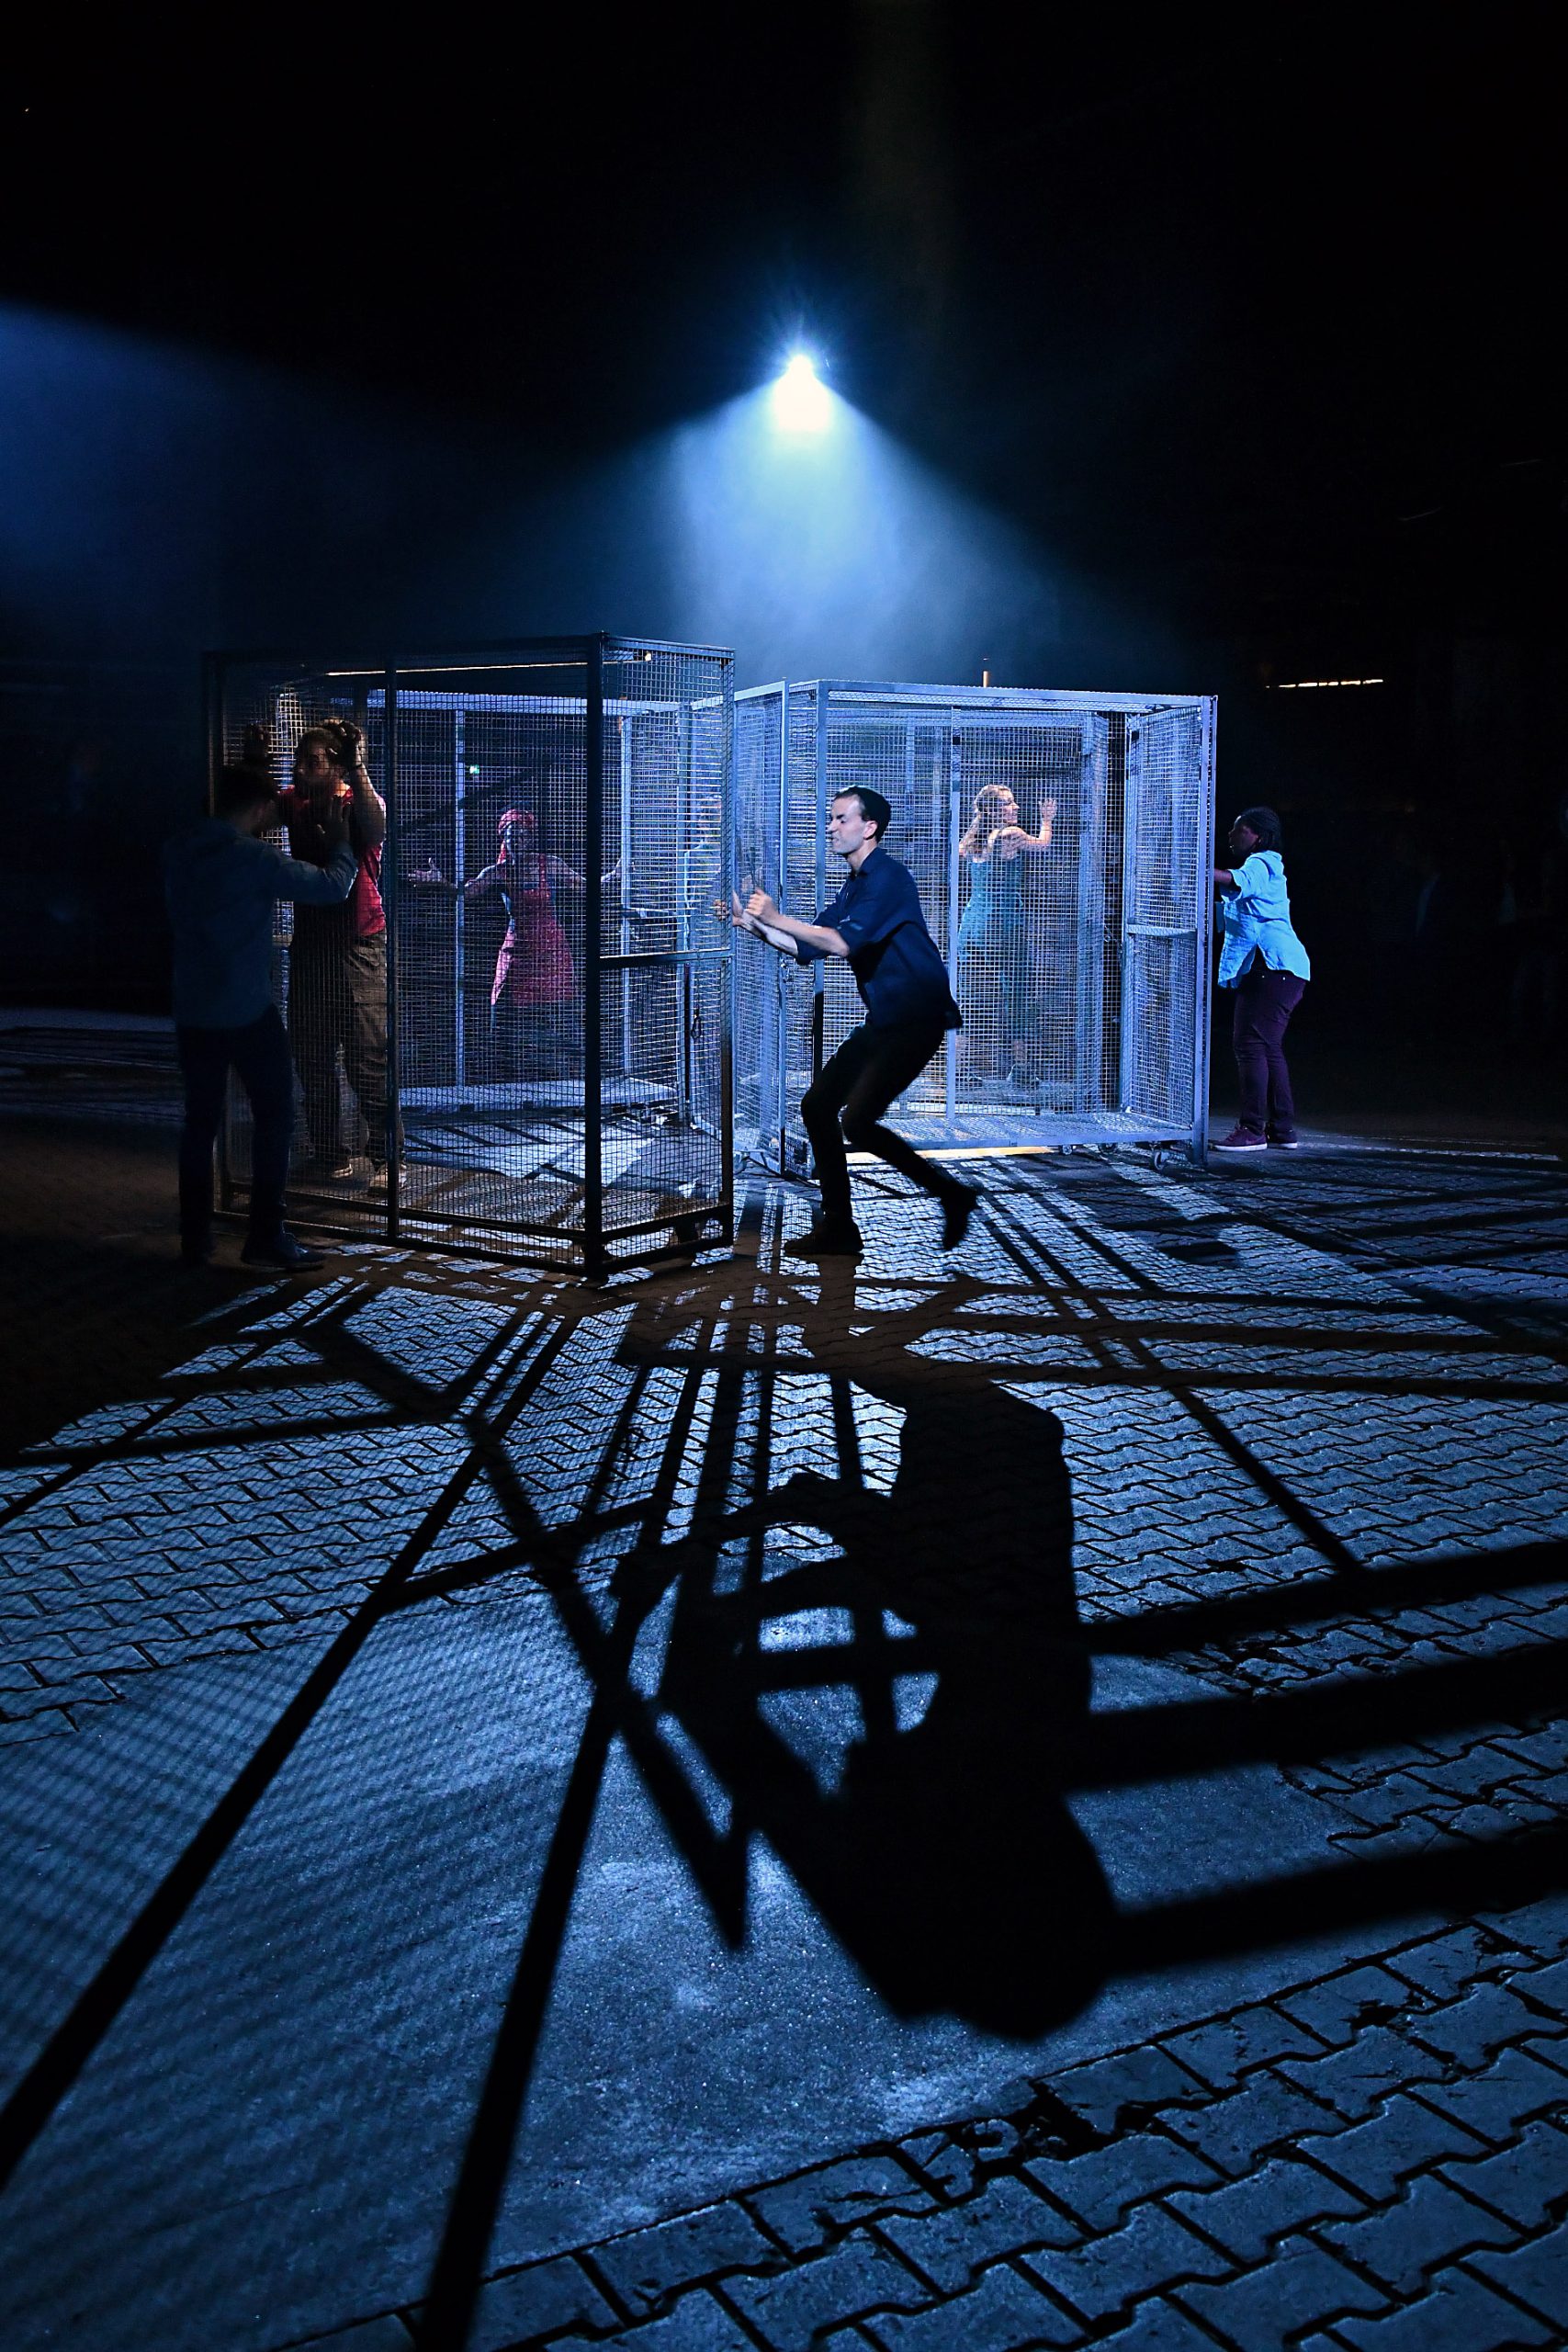 a group of performers are moving large metal cages in a darkened space with a spotlight from above. Some performers are inside the cages.